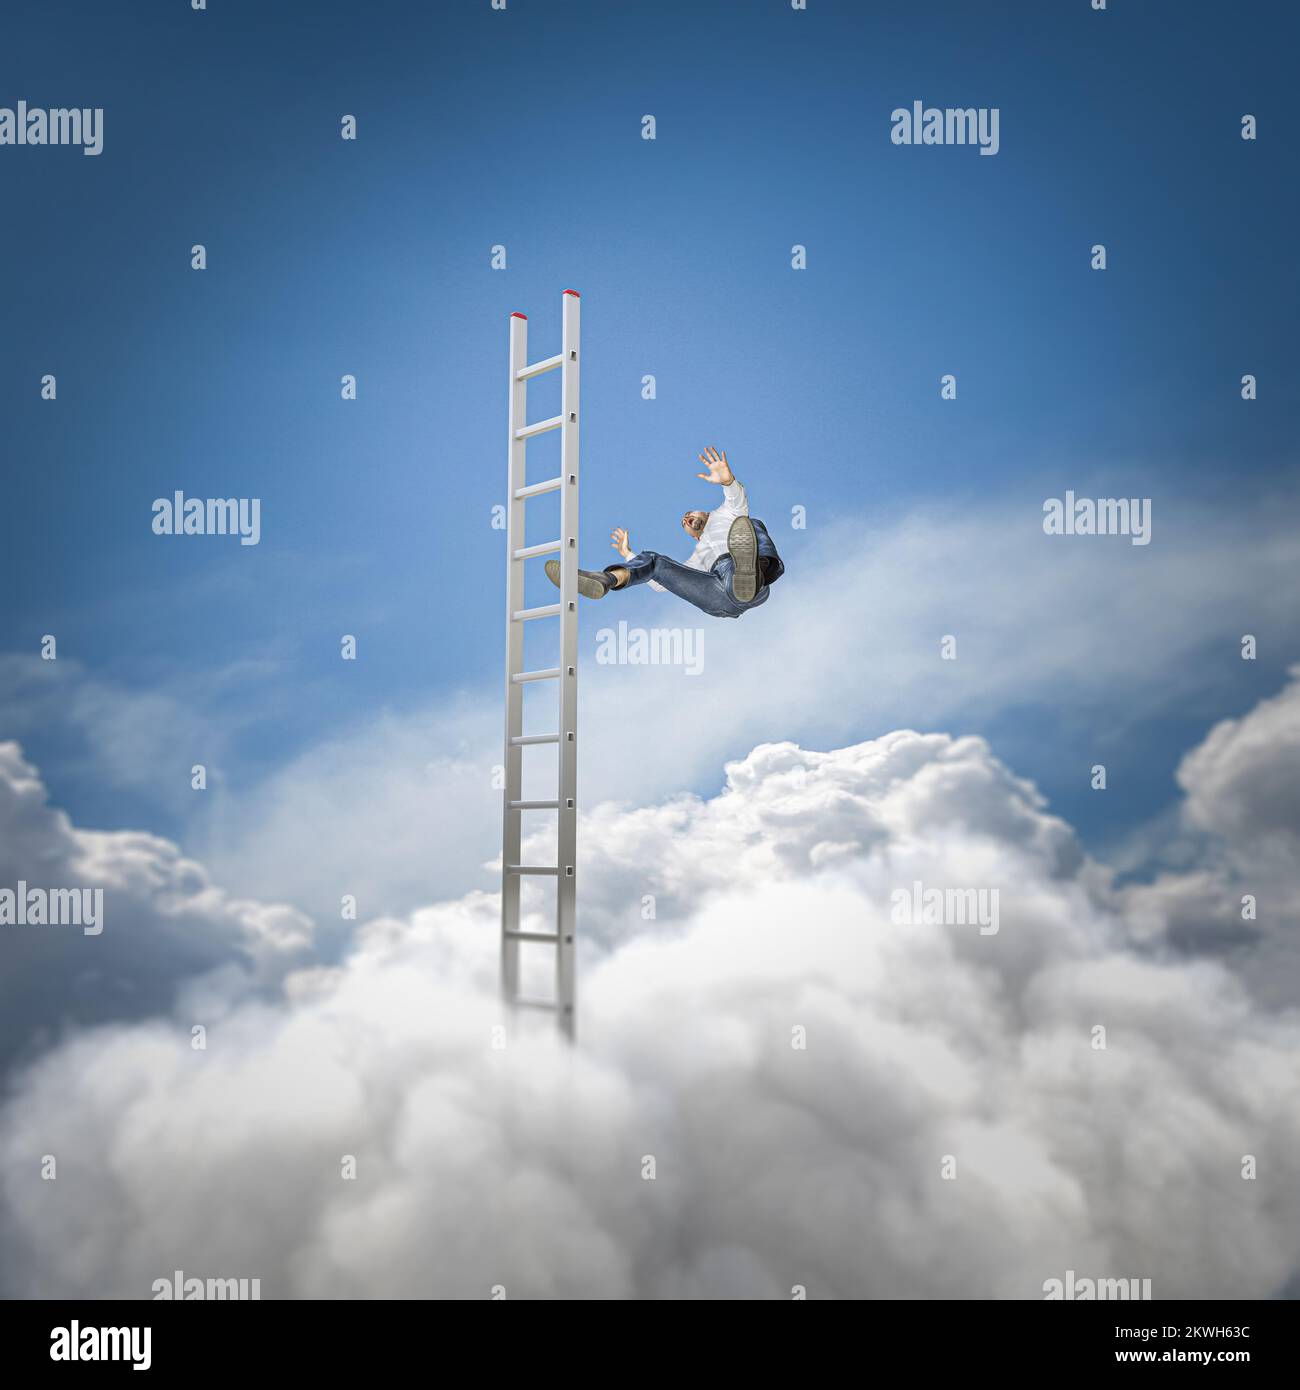 caucasian man falls from a ladder in the clouds. Stock Photo